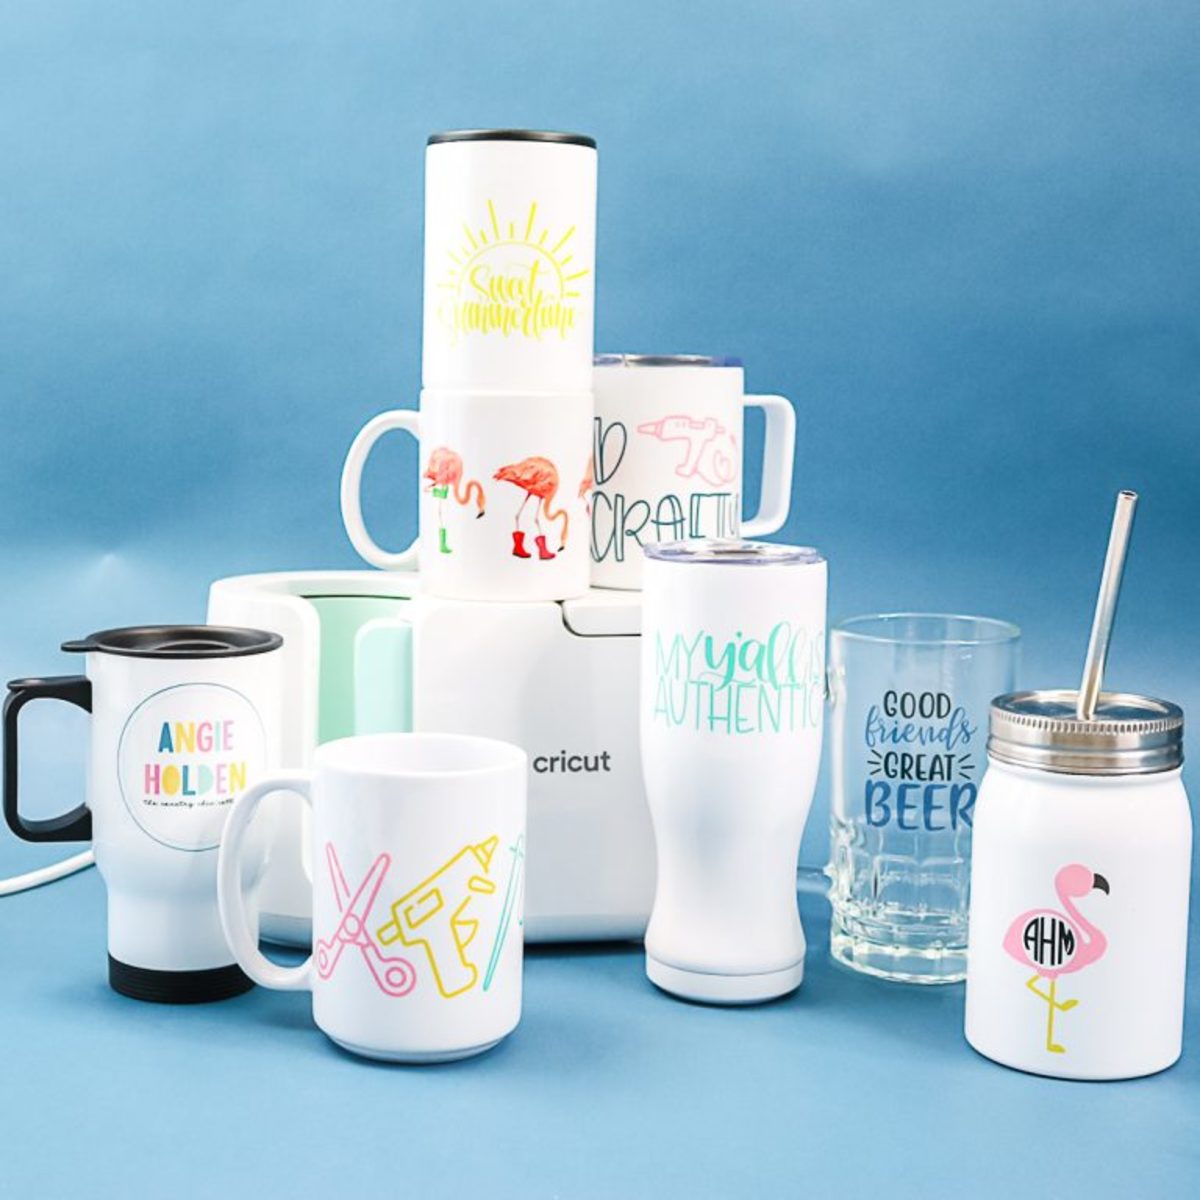 It's not just about mugs! Look at all the things you can create with the Cricut Mug Press